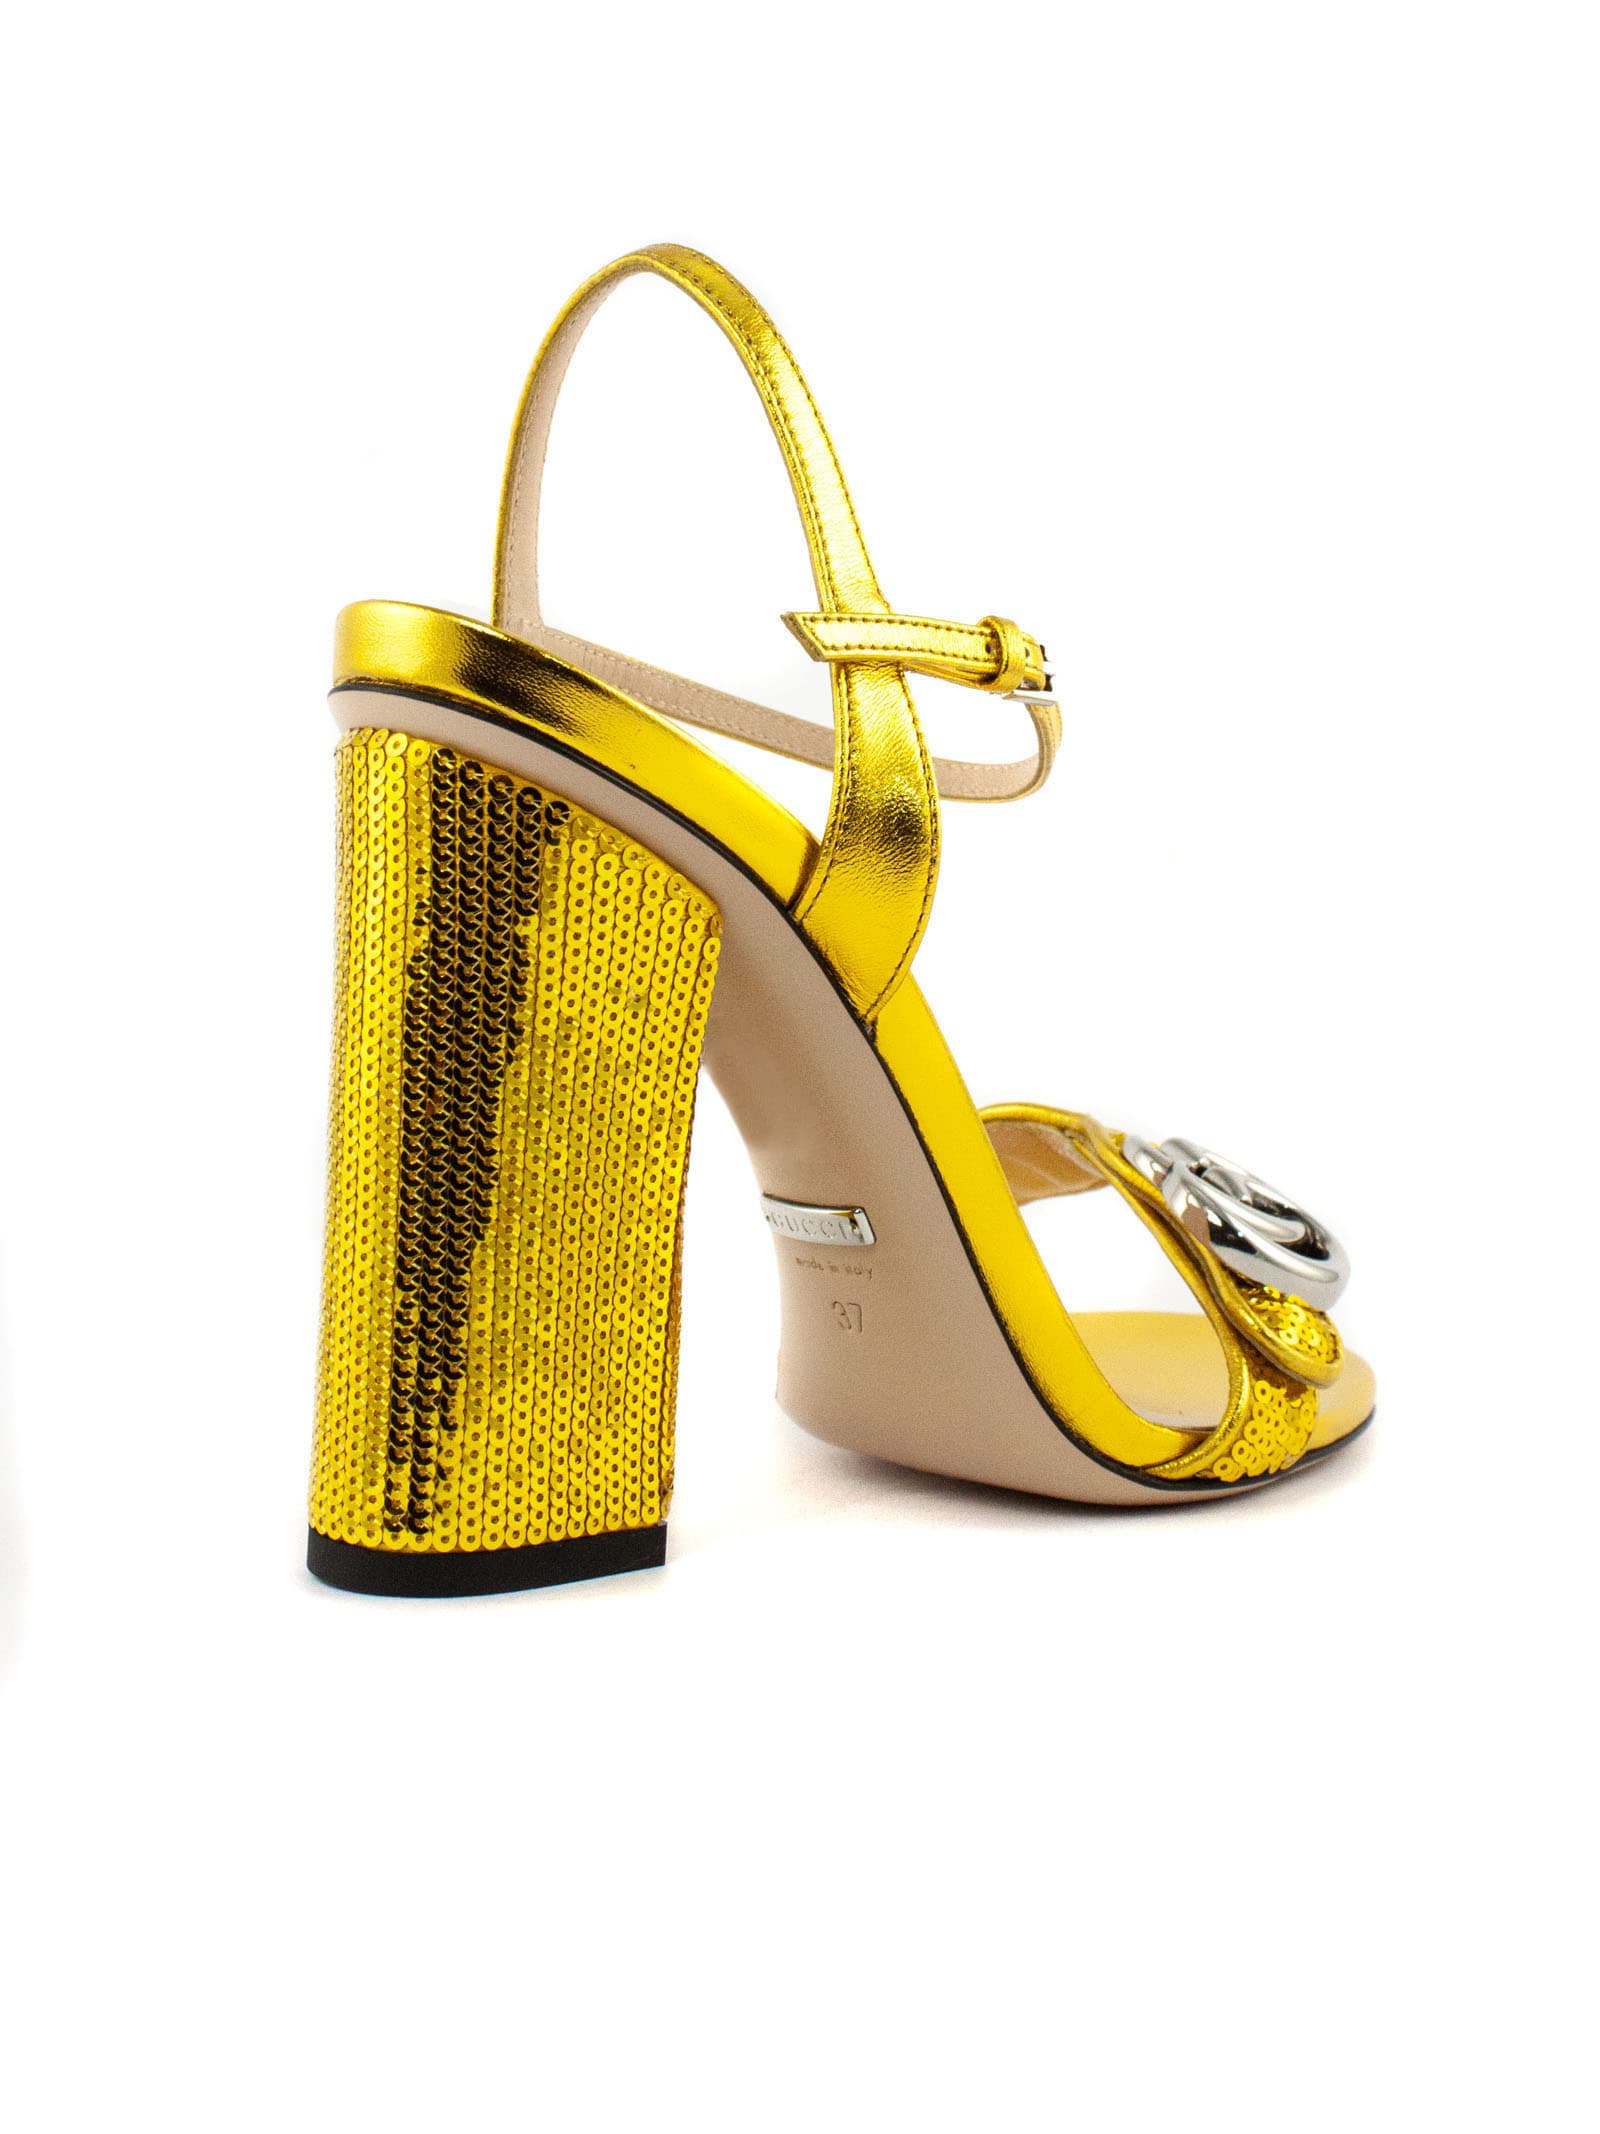 Gucci Gold Sequin Sandals | italist, ALWAYS LIKE A SALE